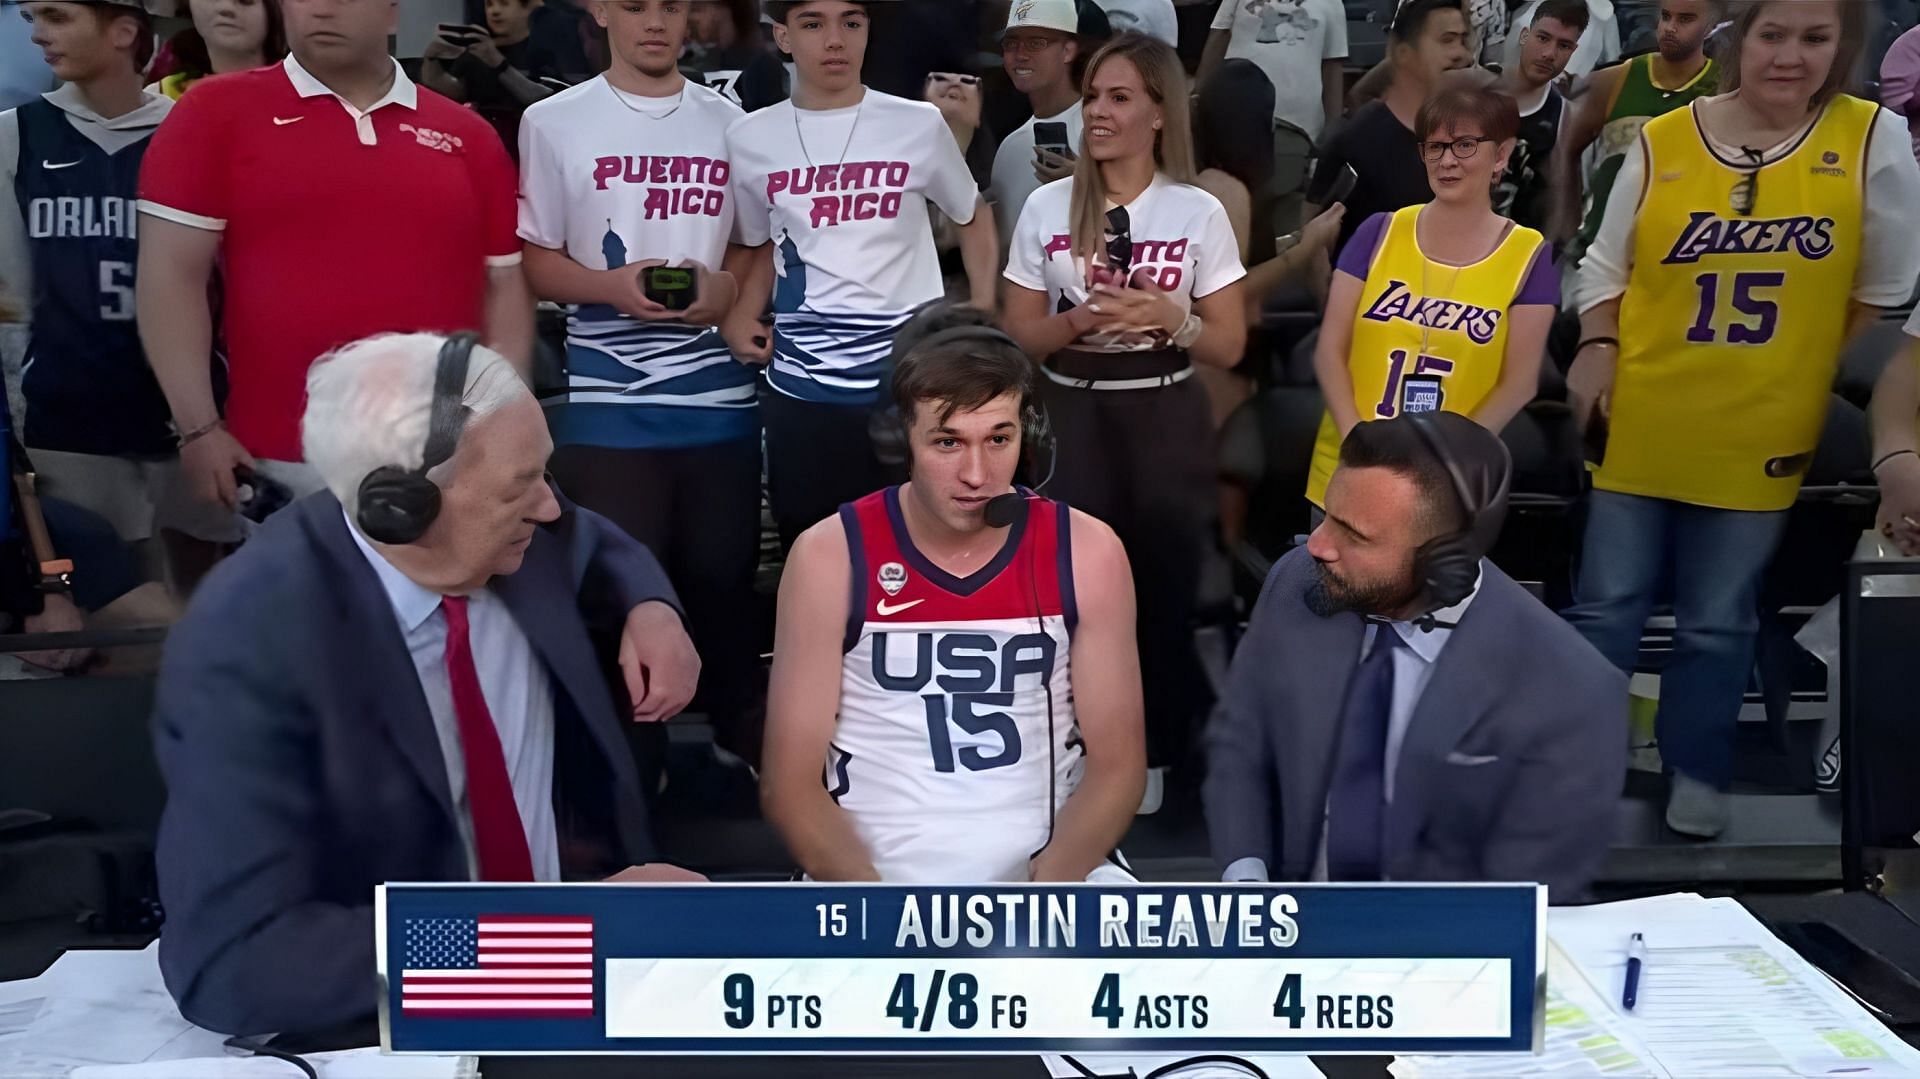 LeBron James shows his love for Austin Reaves after Team USA exhibition game